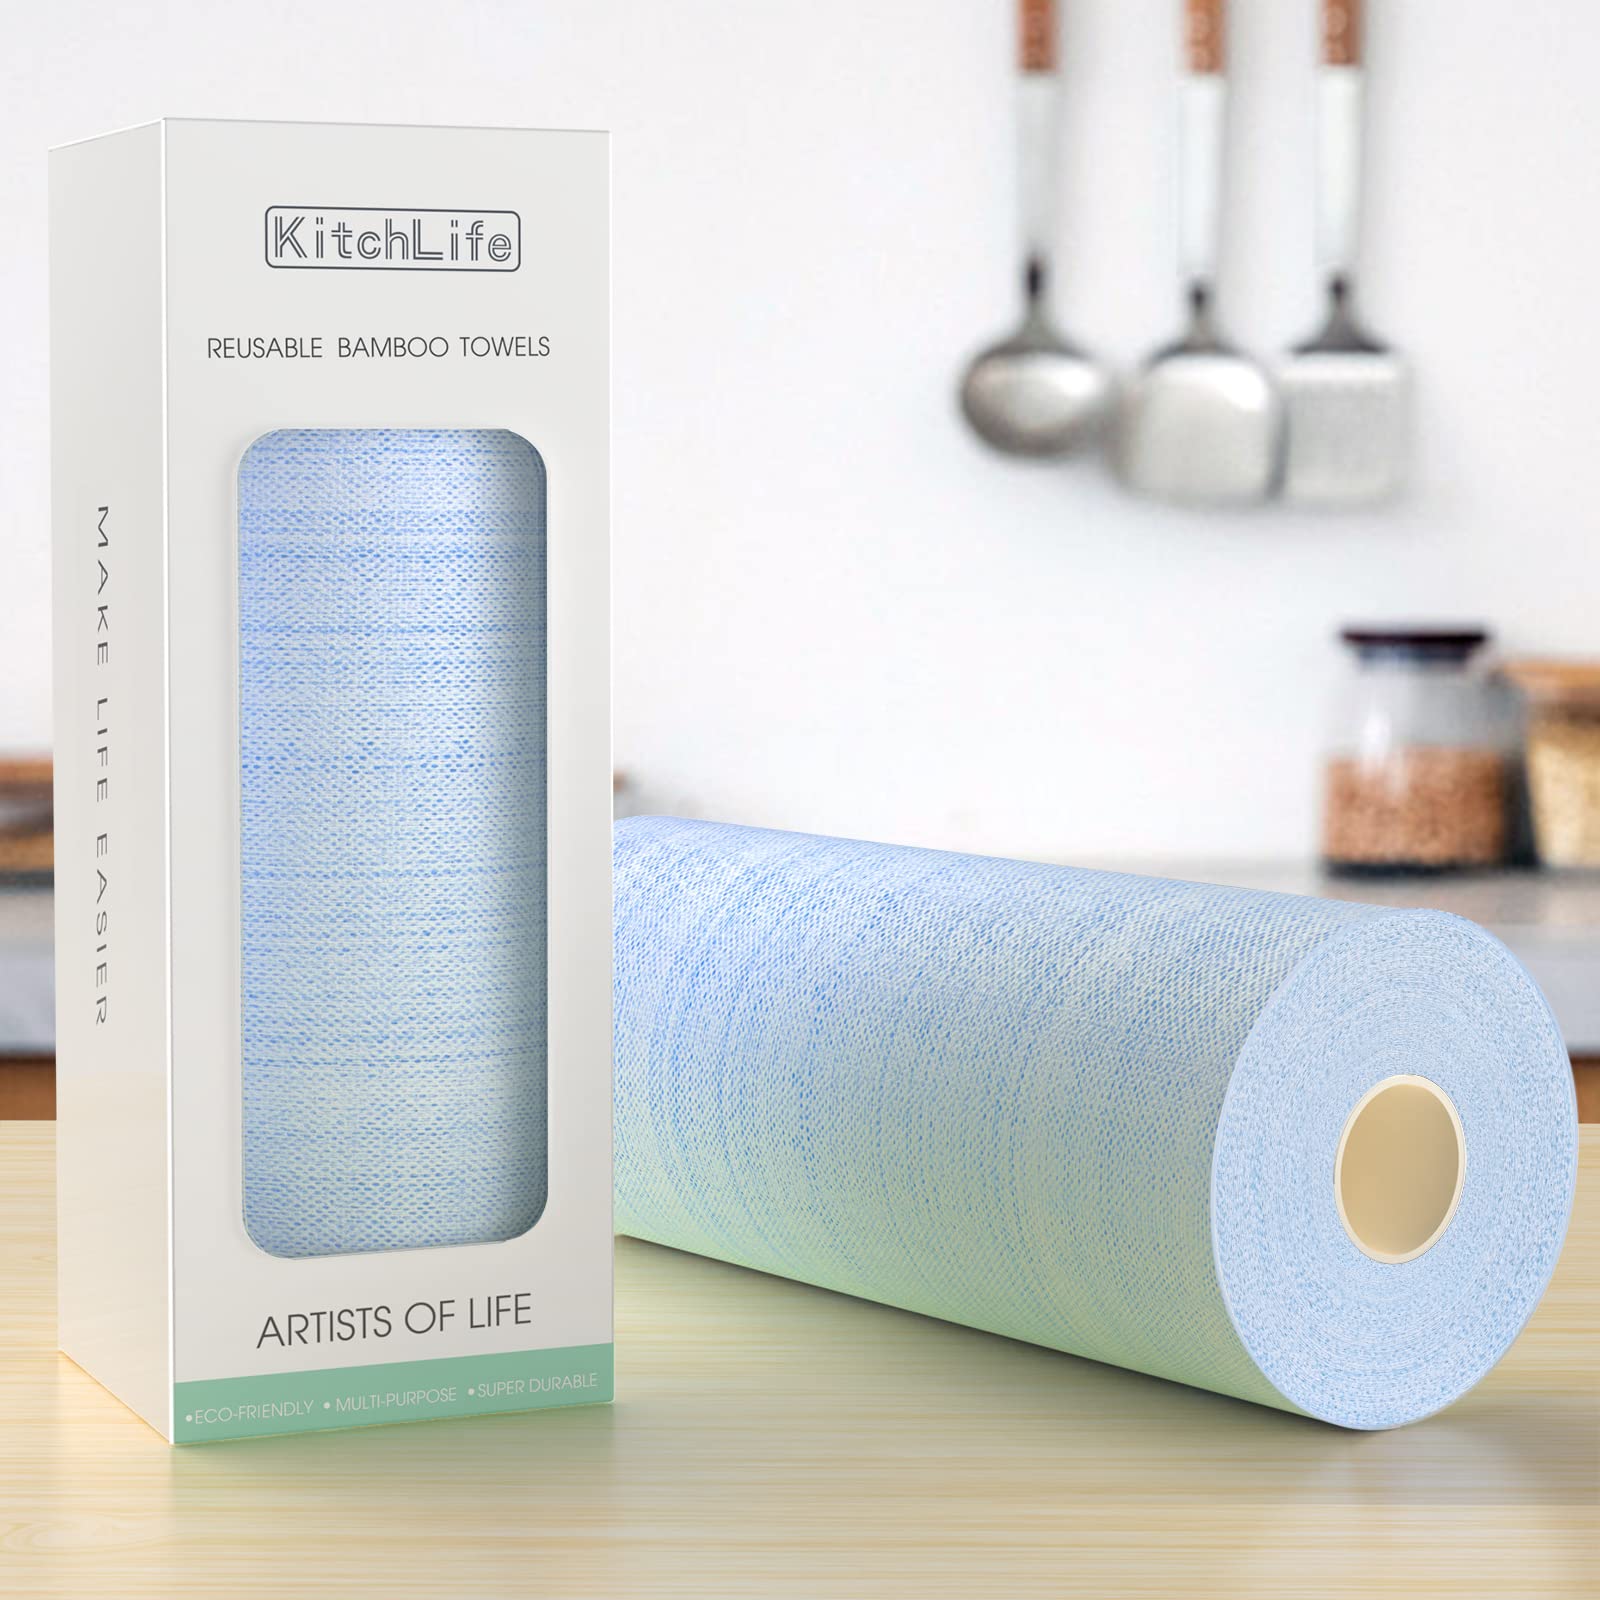 KitchLife Reusable Bamboo Paper Towels - 1 Roll 4 Months Supply, Blue,  Sustainable Gift with Box, Washable and Recycled Kitchen Rolls, Eco  Friendly and Biodegradable 1 Count (Pack of 1) 1 x Blue